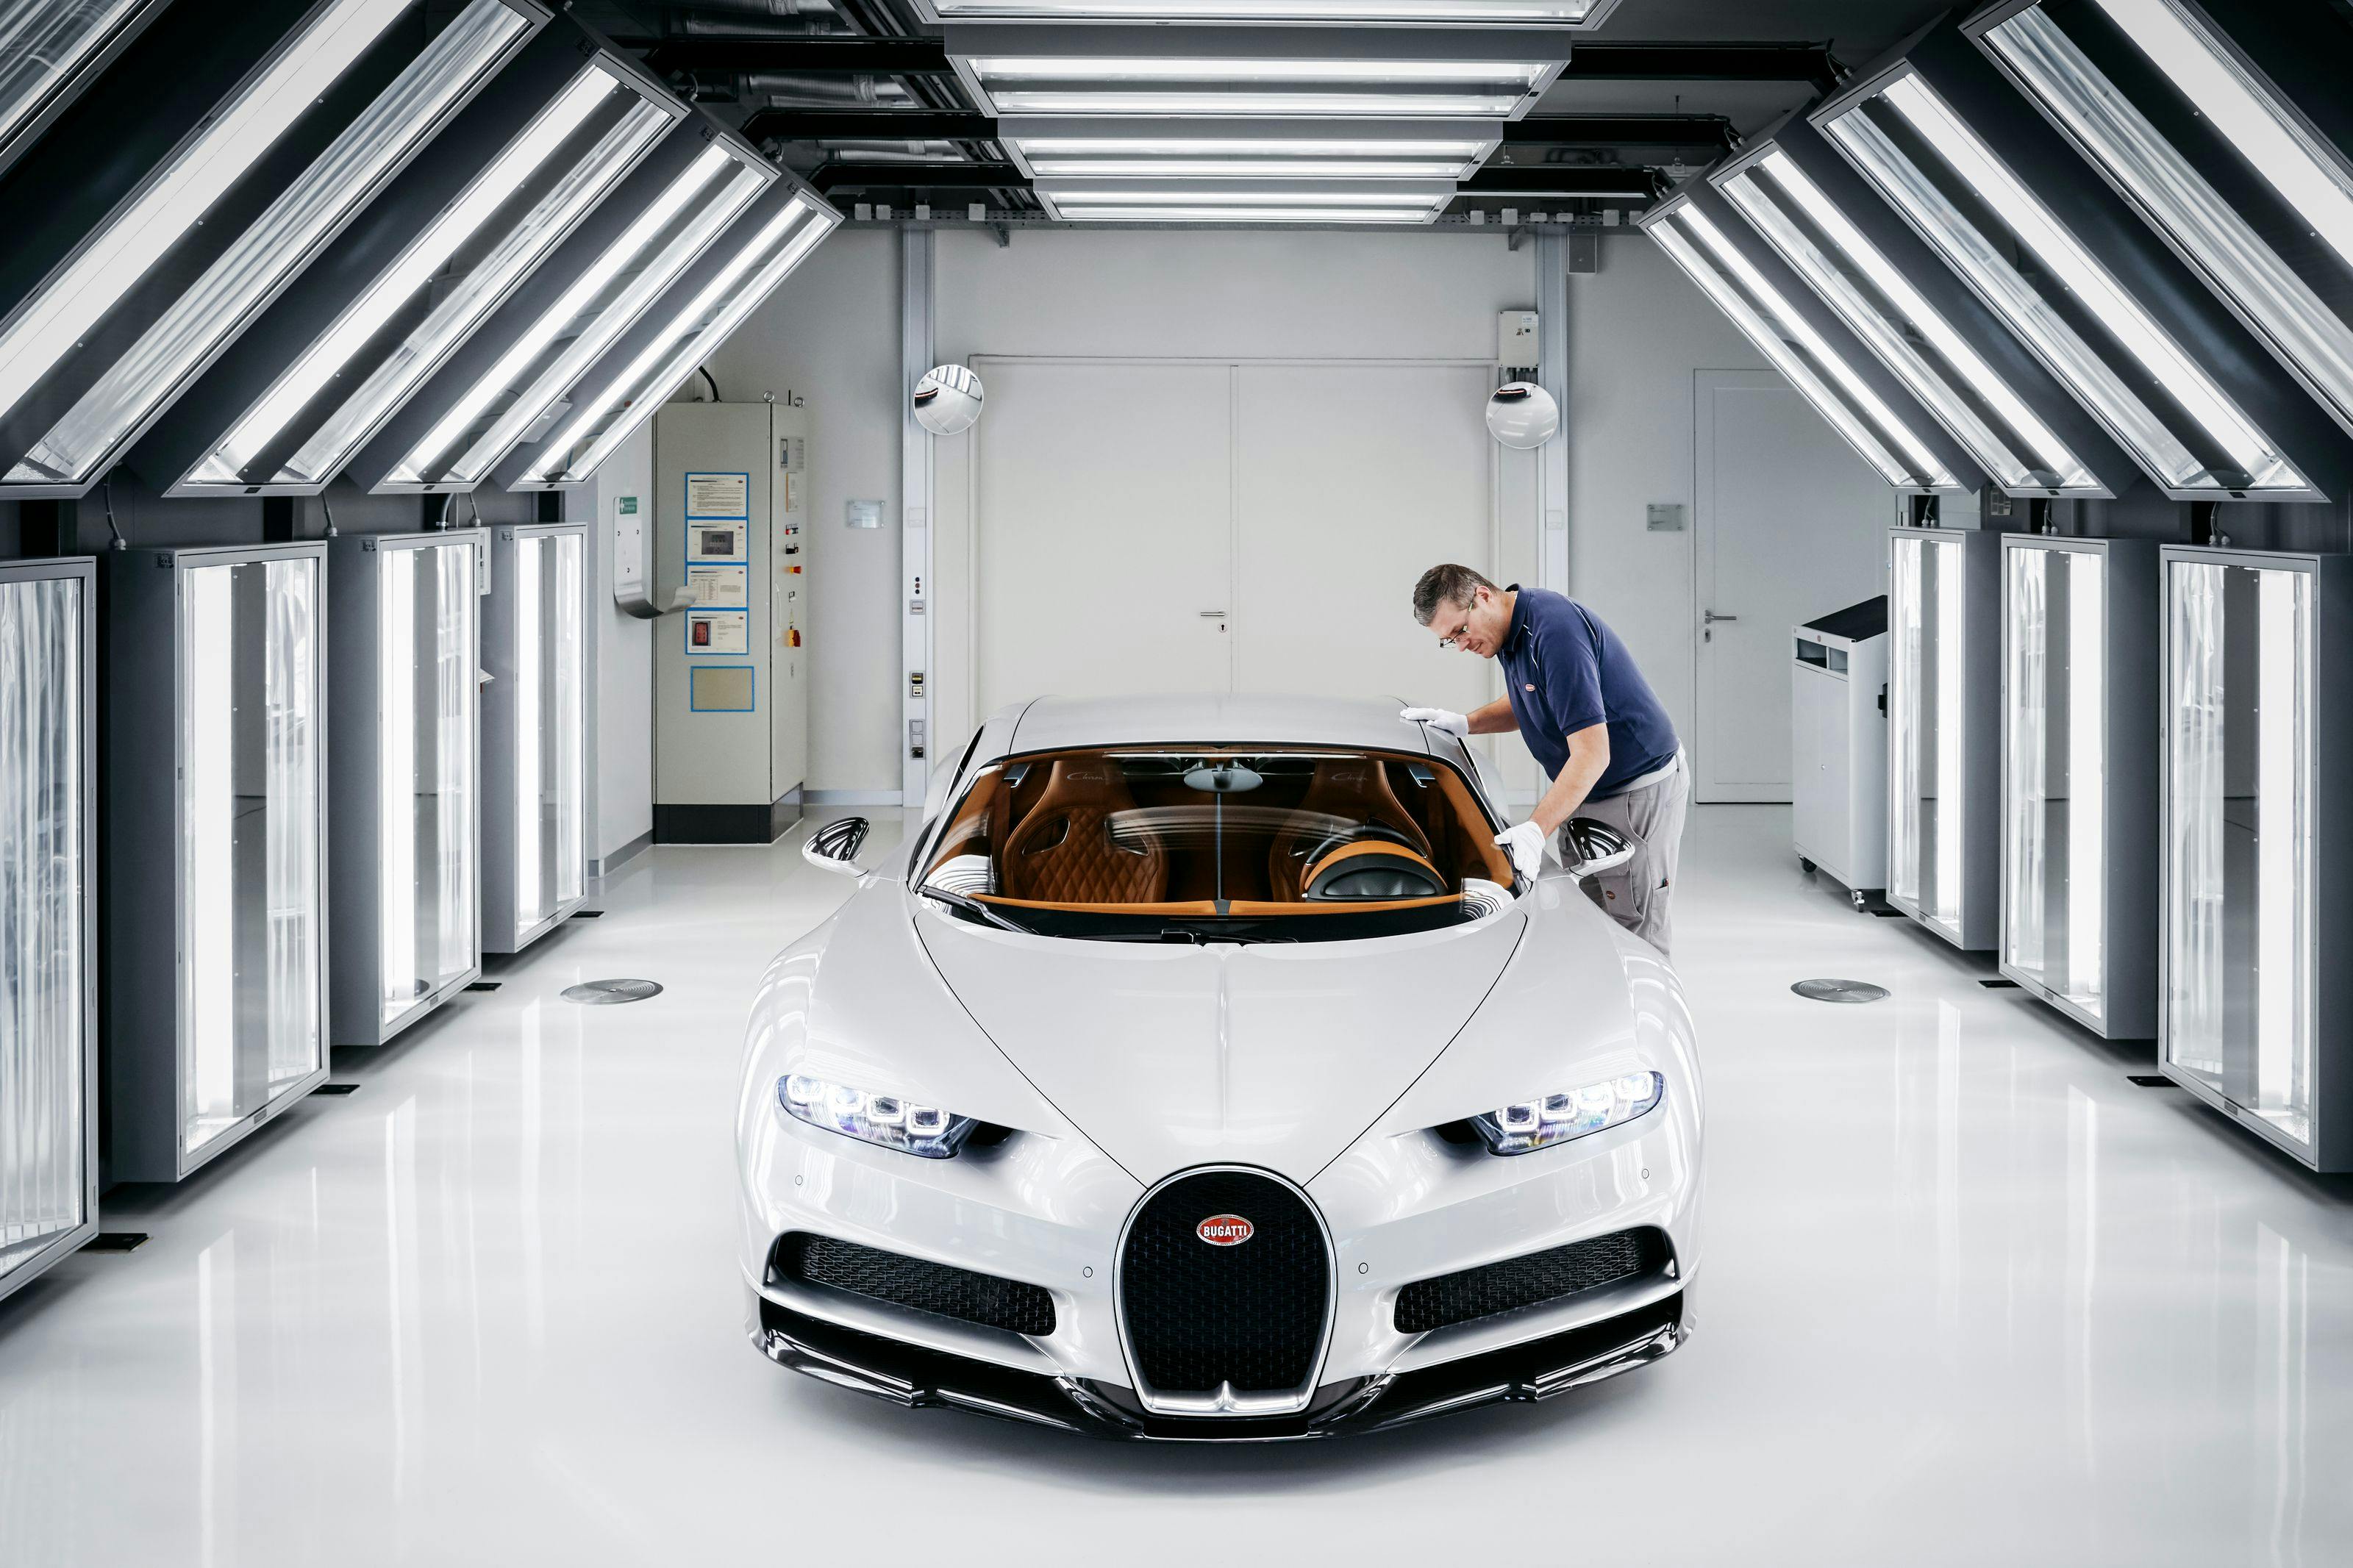 Bugatti Chiron – The Importance of the Chiron in the Automotive World